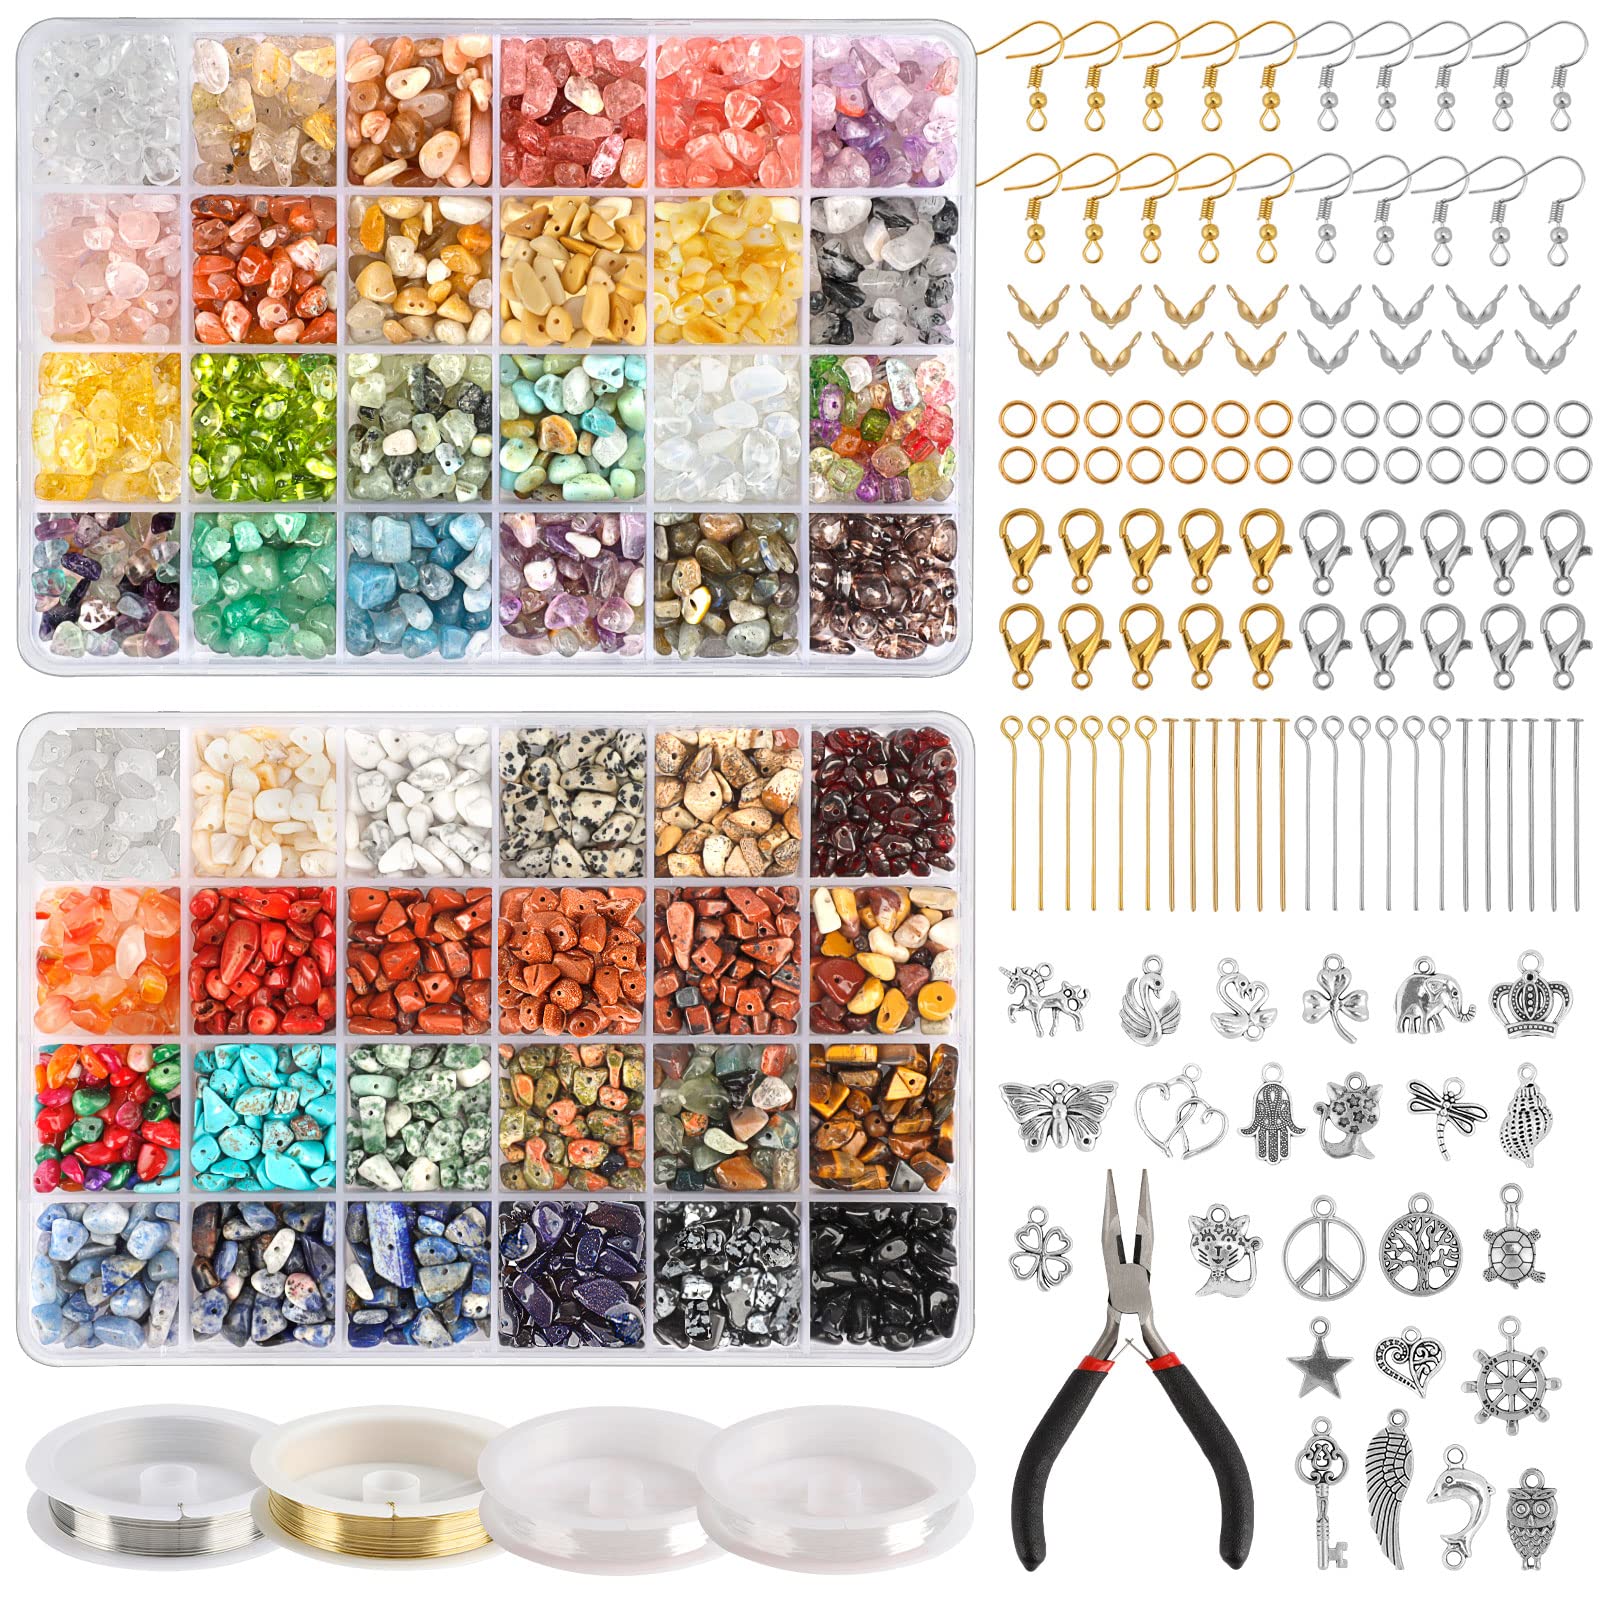 Quefe 2360pcs 48 Colors Crystals Beads for Ring Making Kit, Gemstone Chip  Irregular Natural Stone with Jewelry Making Supplies f